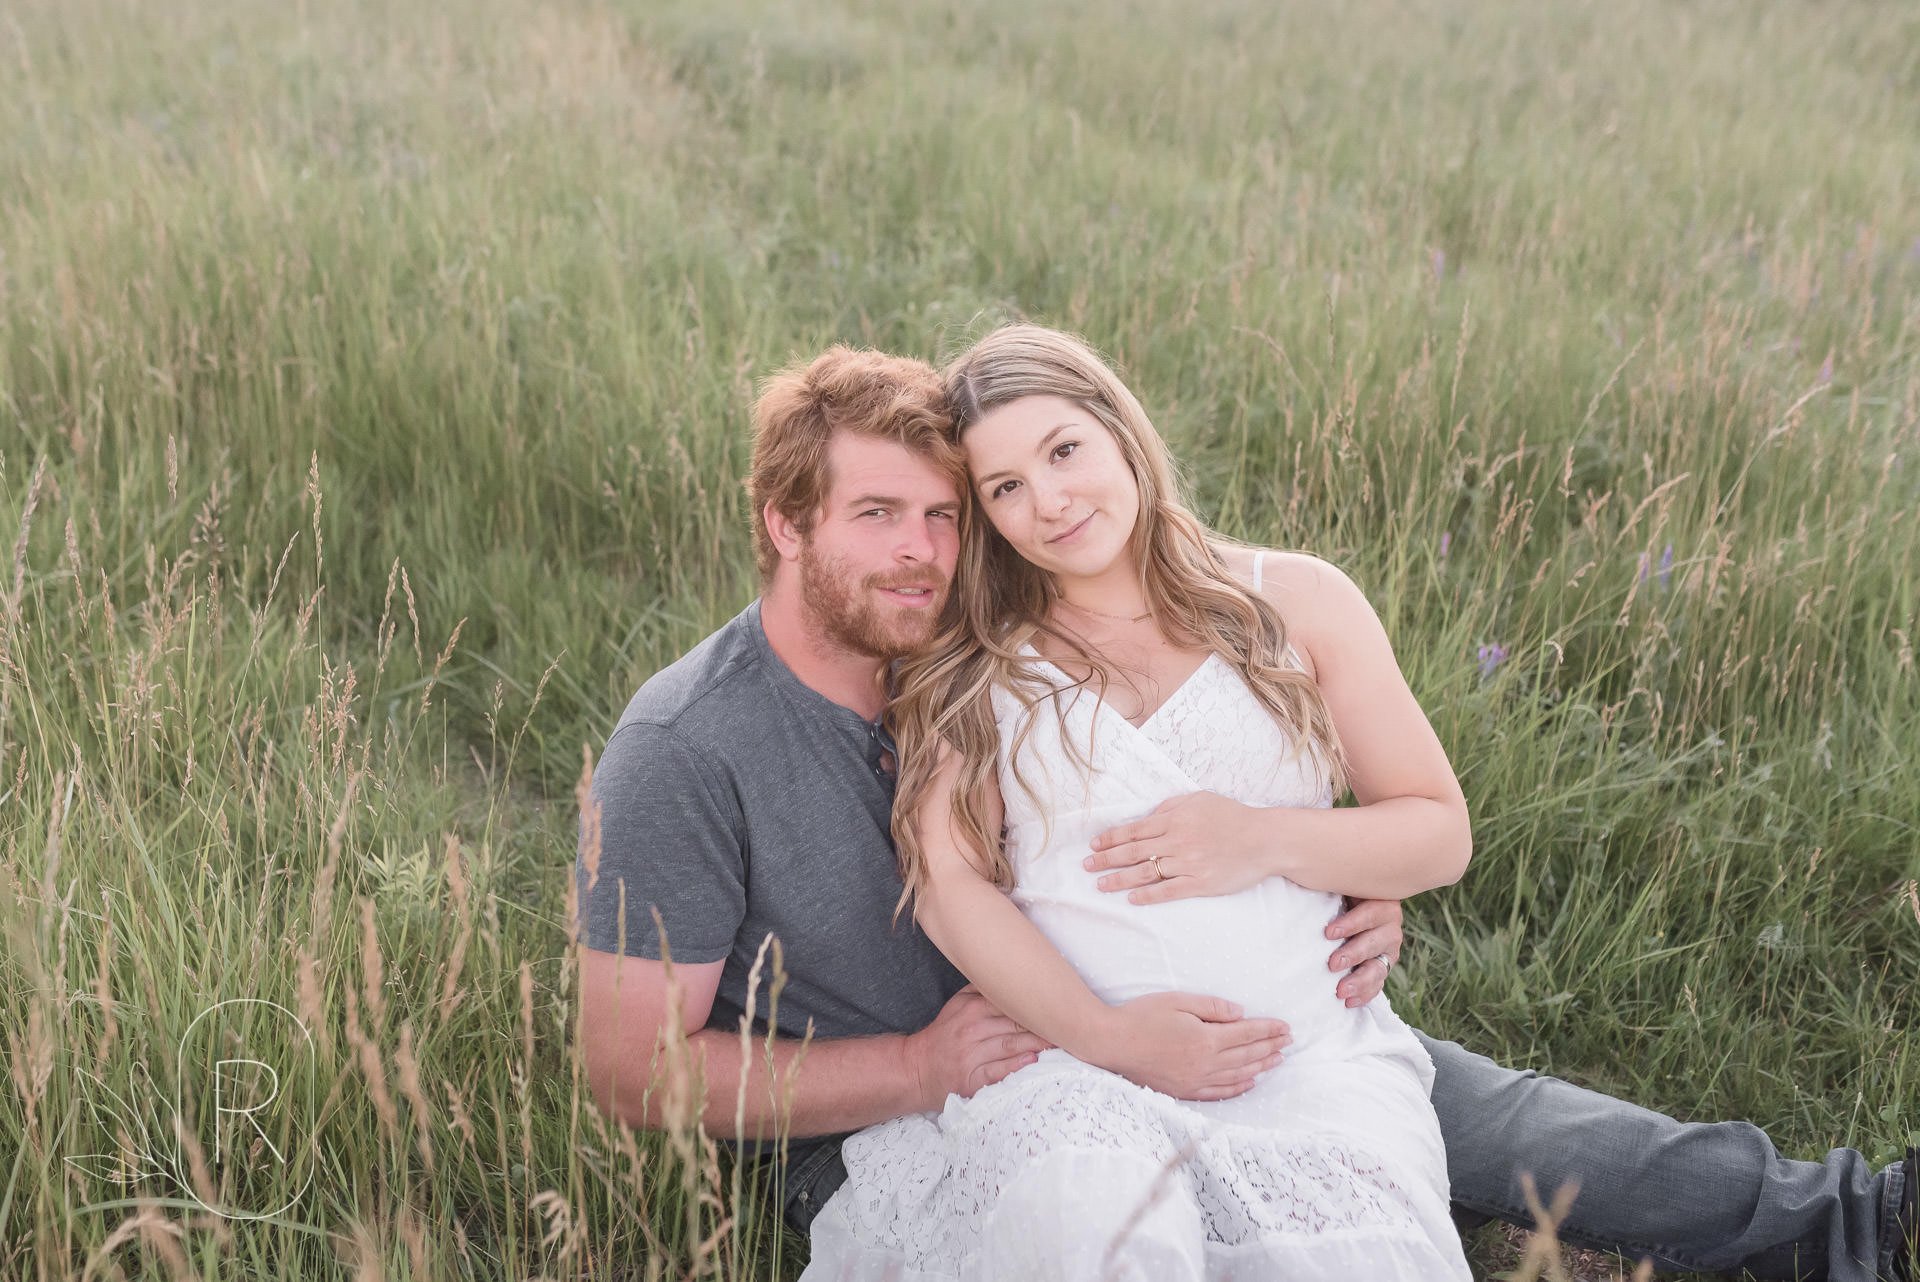 maternity-session-baby-bump-pregnancy-meadow-session-family-photography-Reflections-niagara-ontario.jpeg